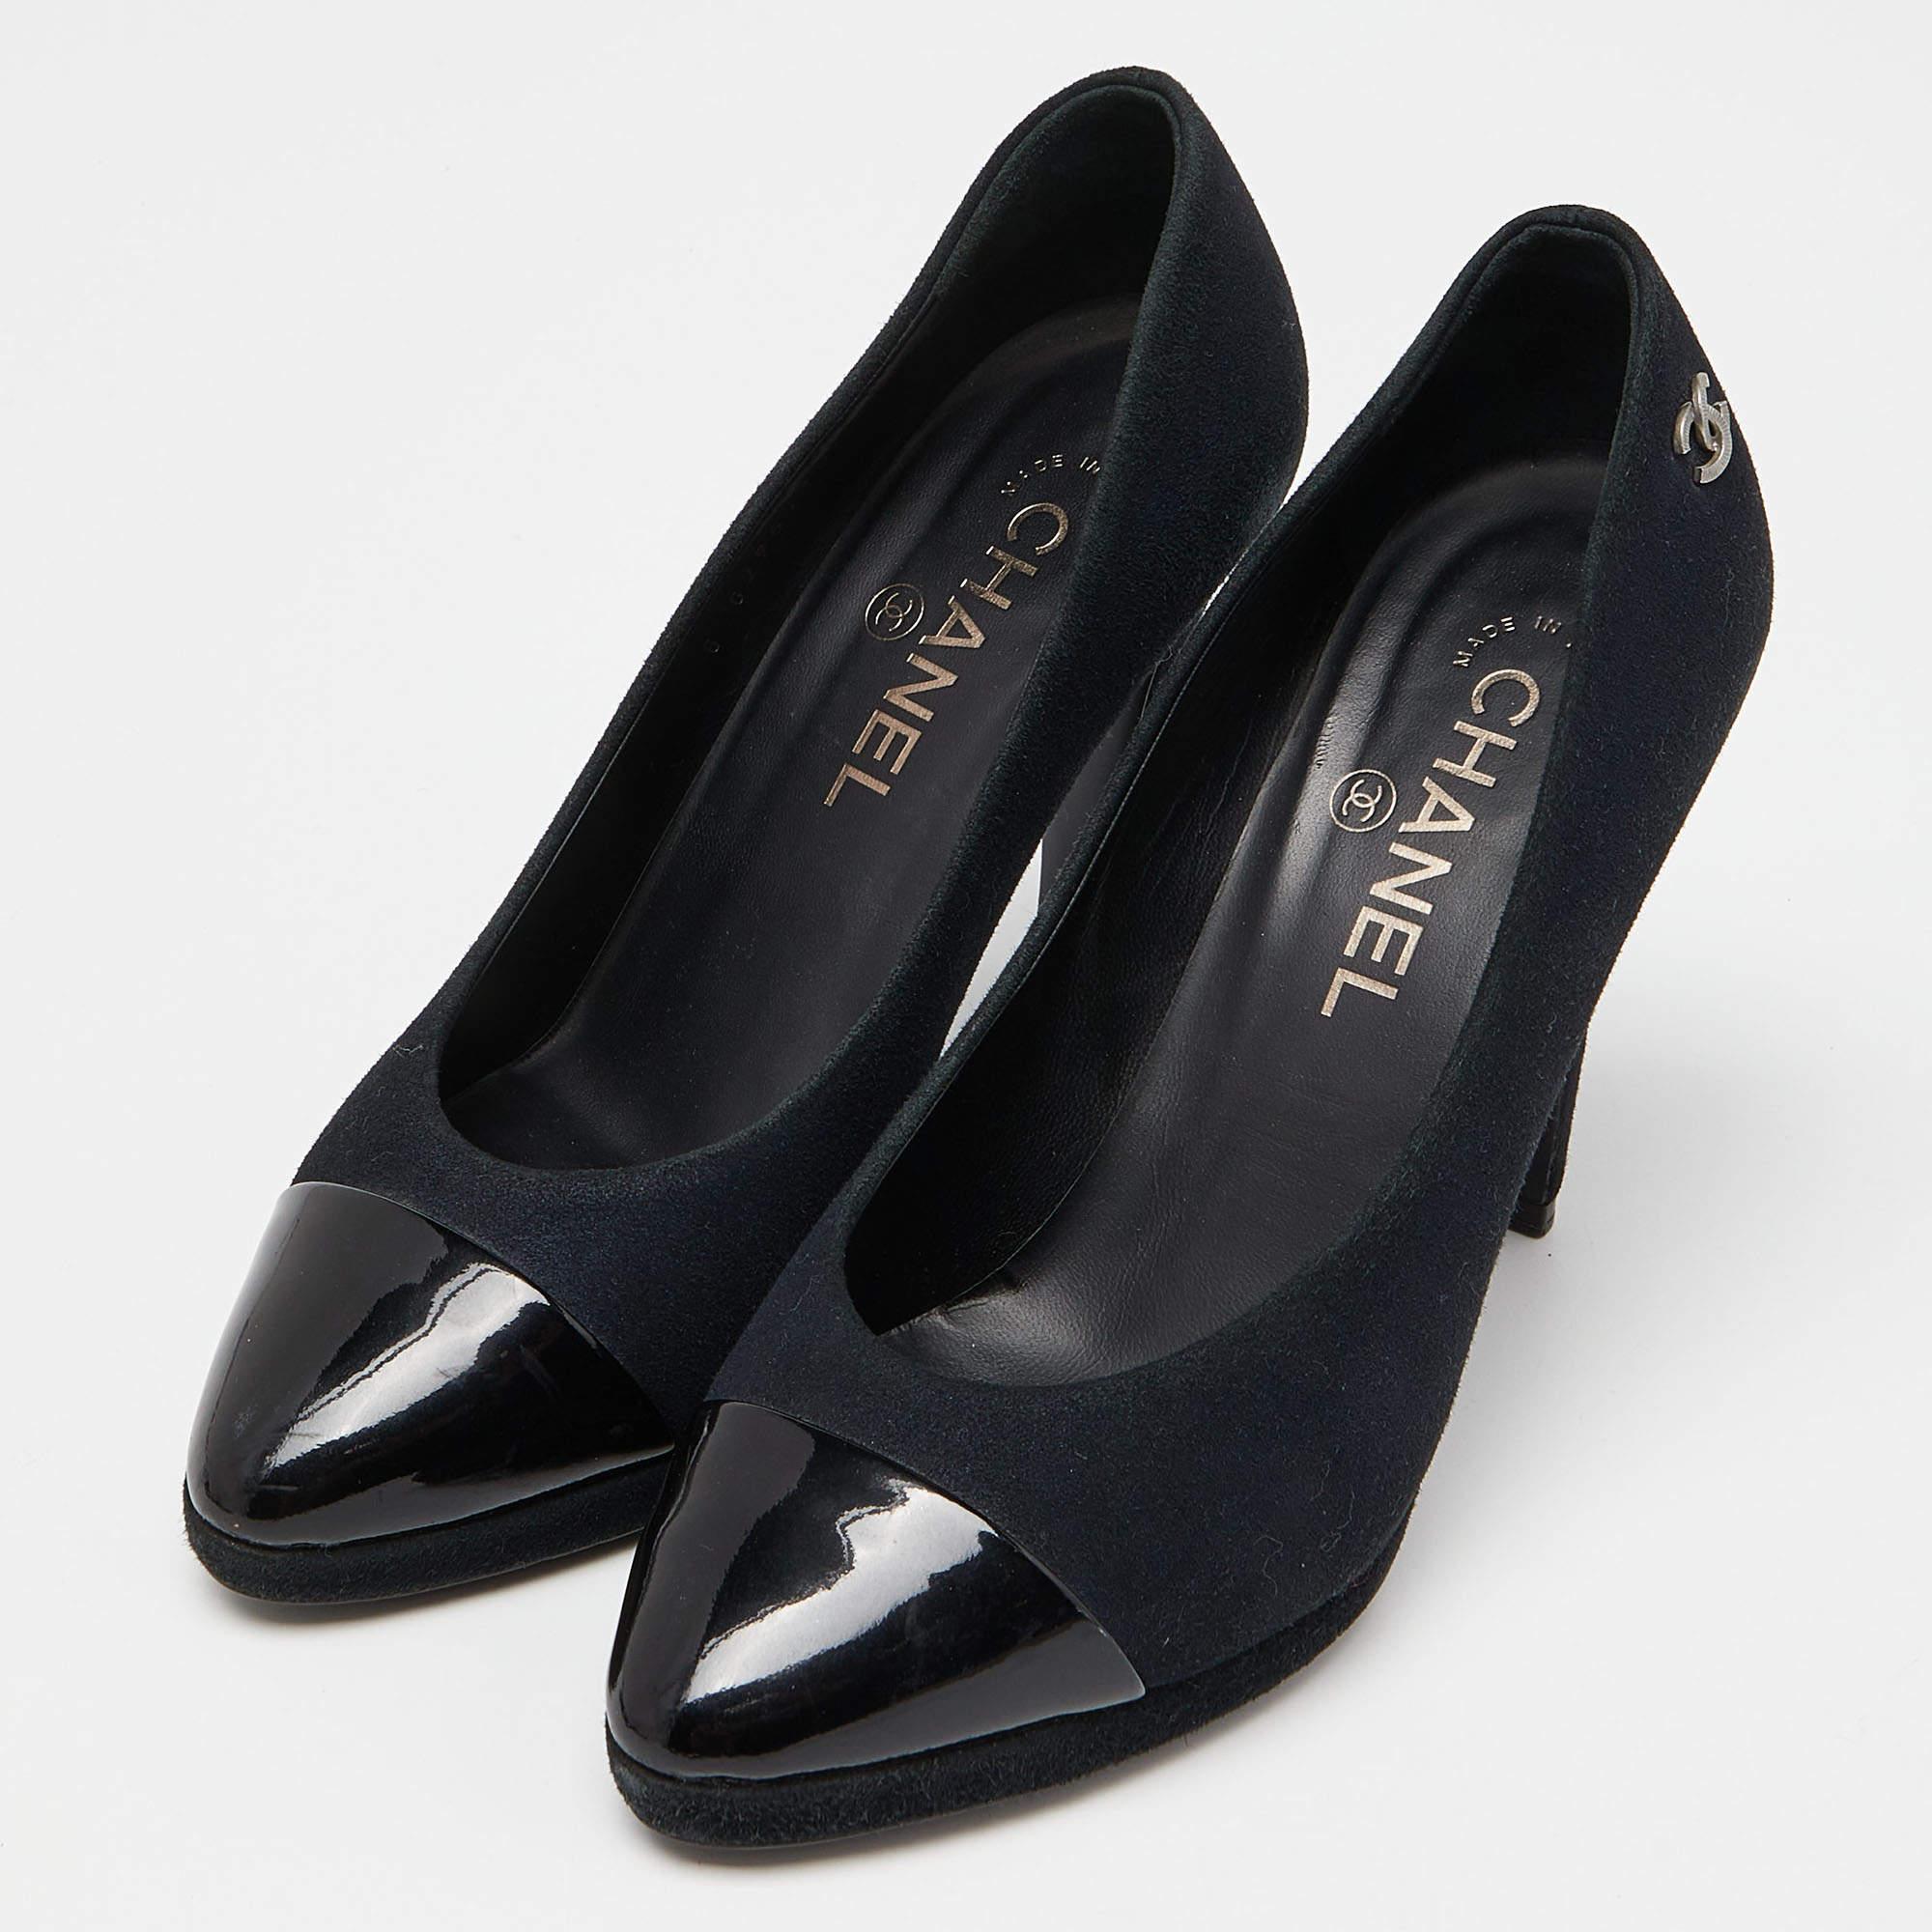 Chanel Black Fabric and Patent Leather Cap Toe CC Pumps Size 38 1